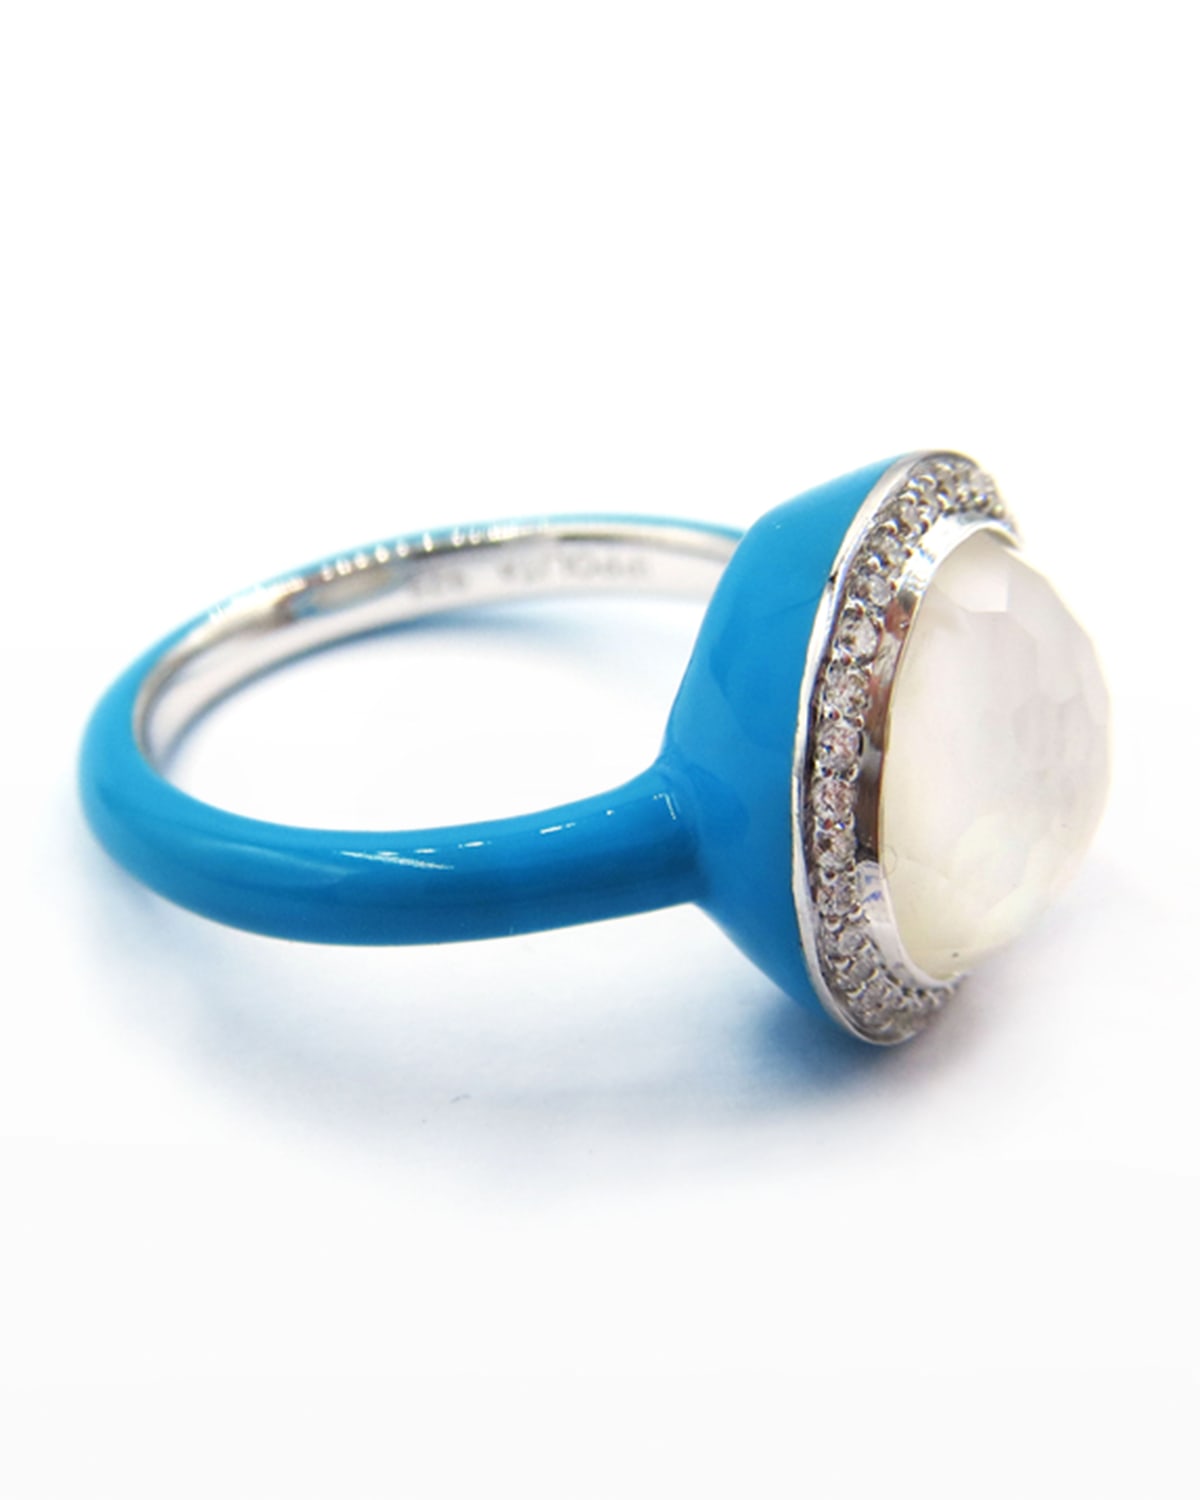 IPPOLITA LOLLIPOP CARNEVALE RING IN STERLING SILVER WITH MOTHER-OF-PEARL DOUBLETS AND CERAMIC